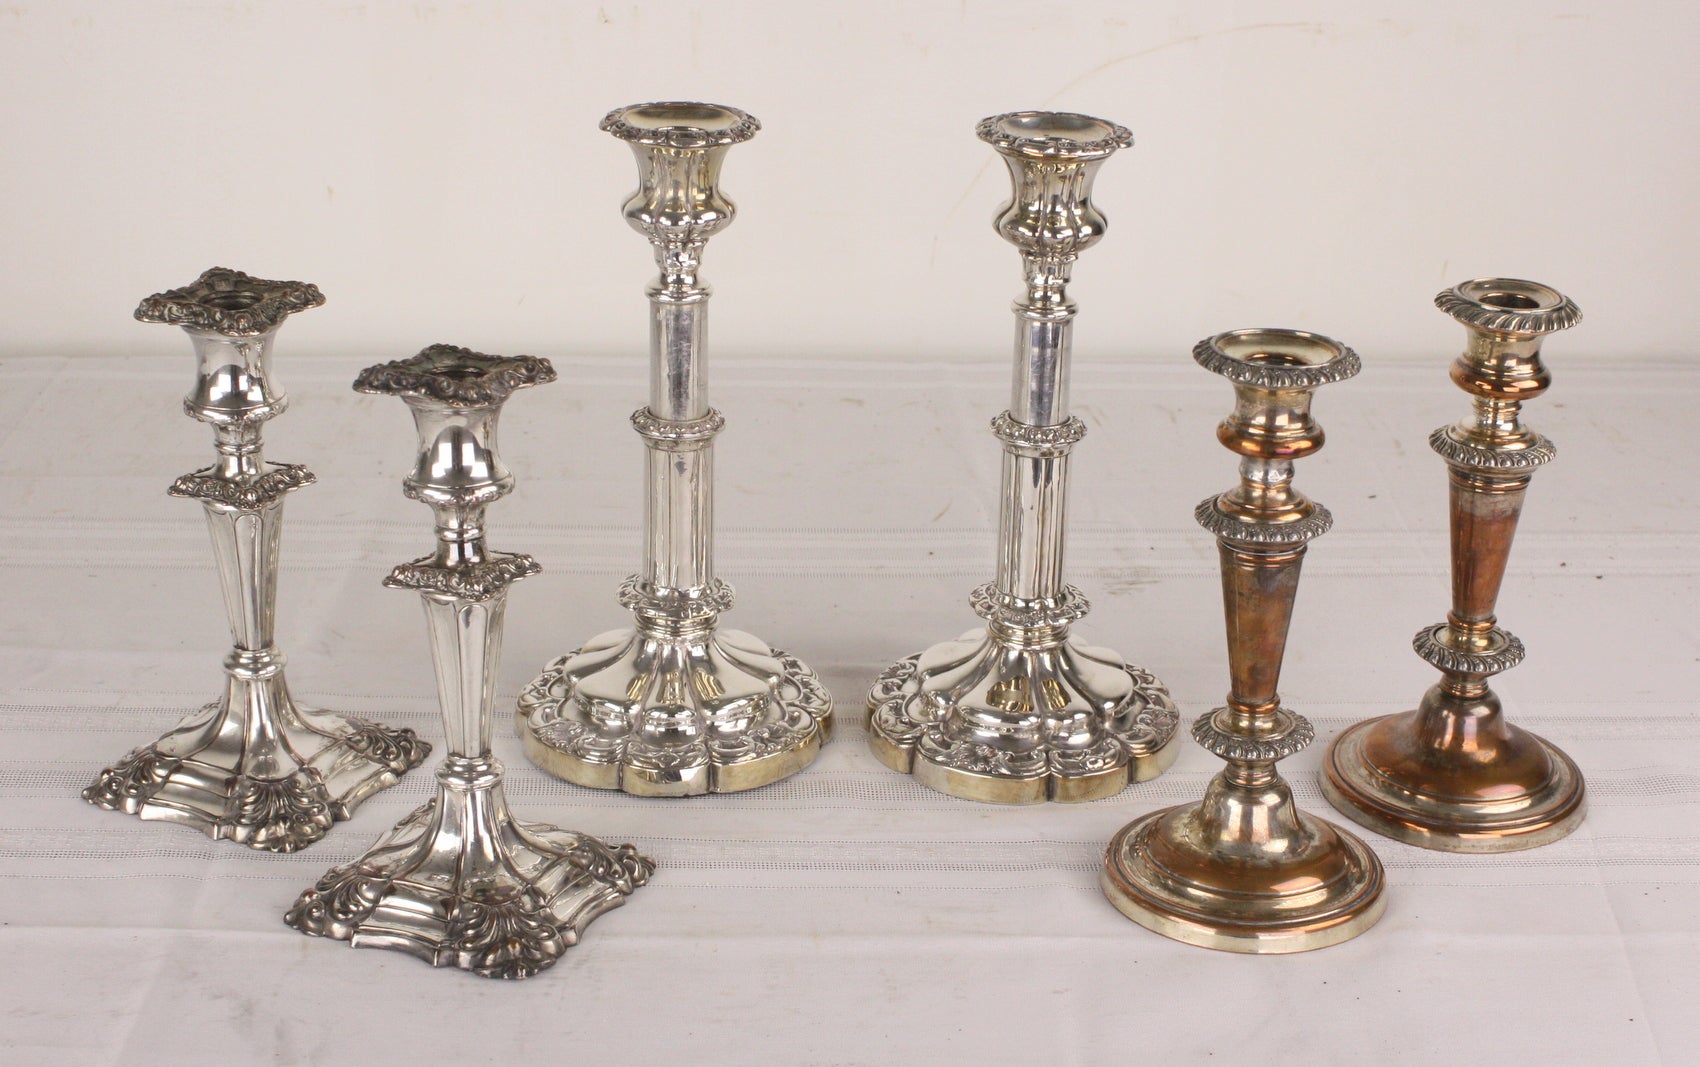 Collection of Three Pairs of Antique English Silver Plated Candlesticks